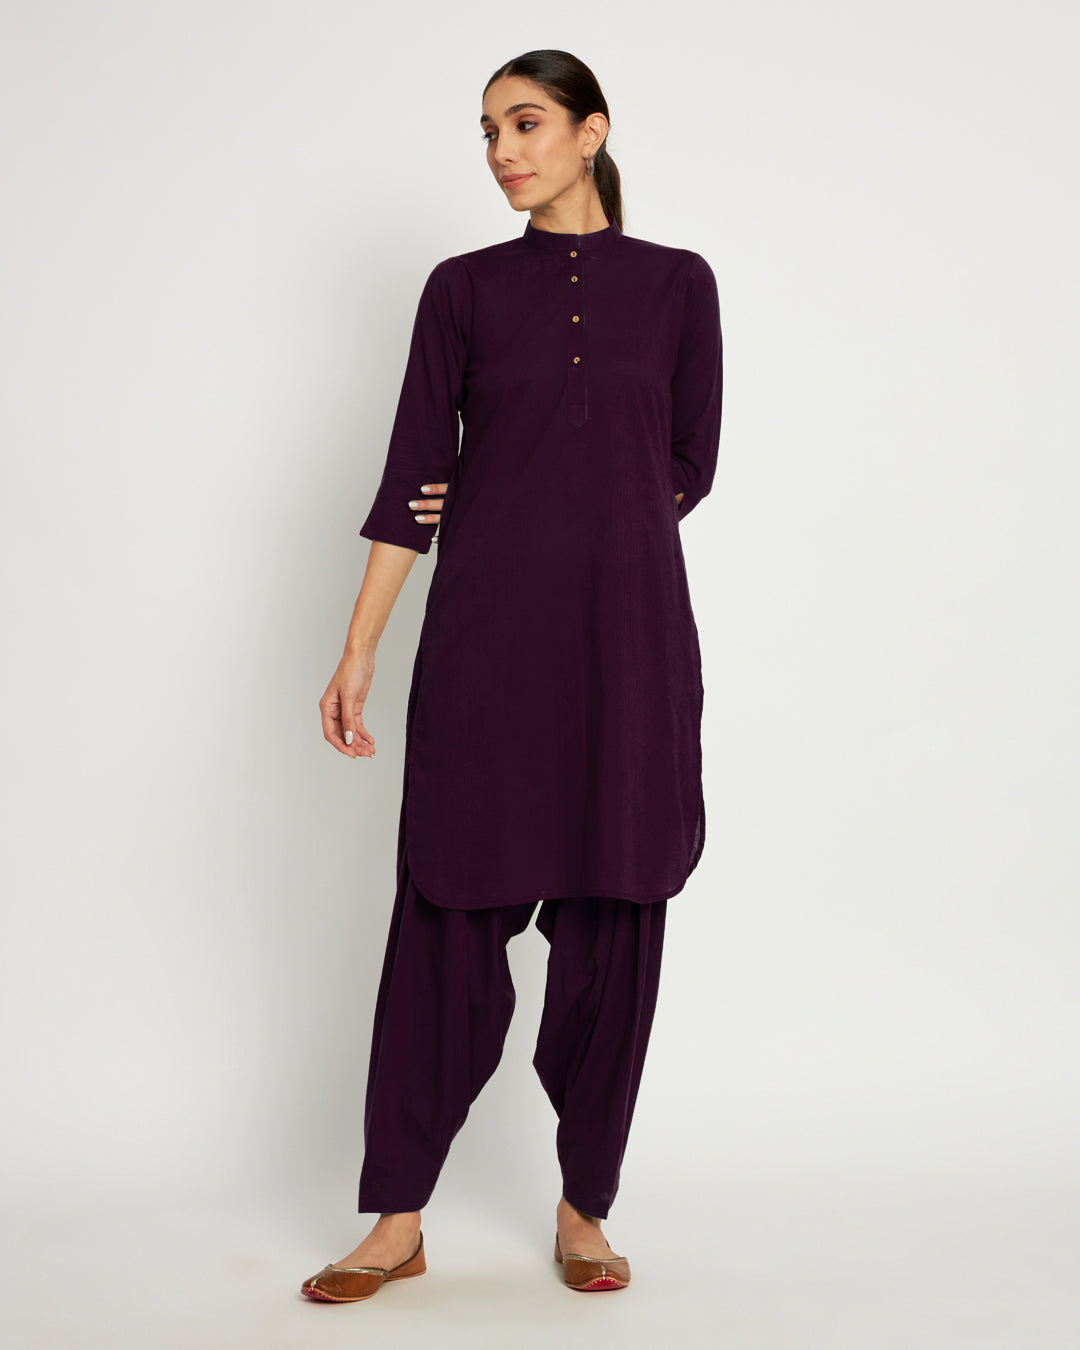 Plum Passion Band Collar Neck Solid Co-ord Set